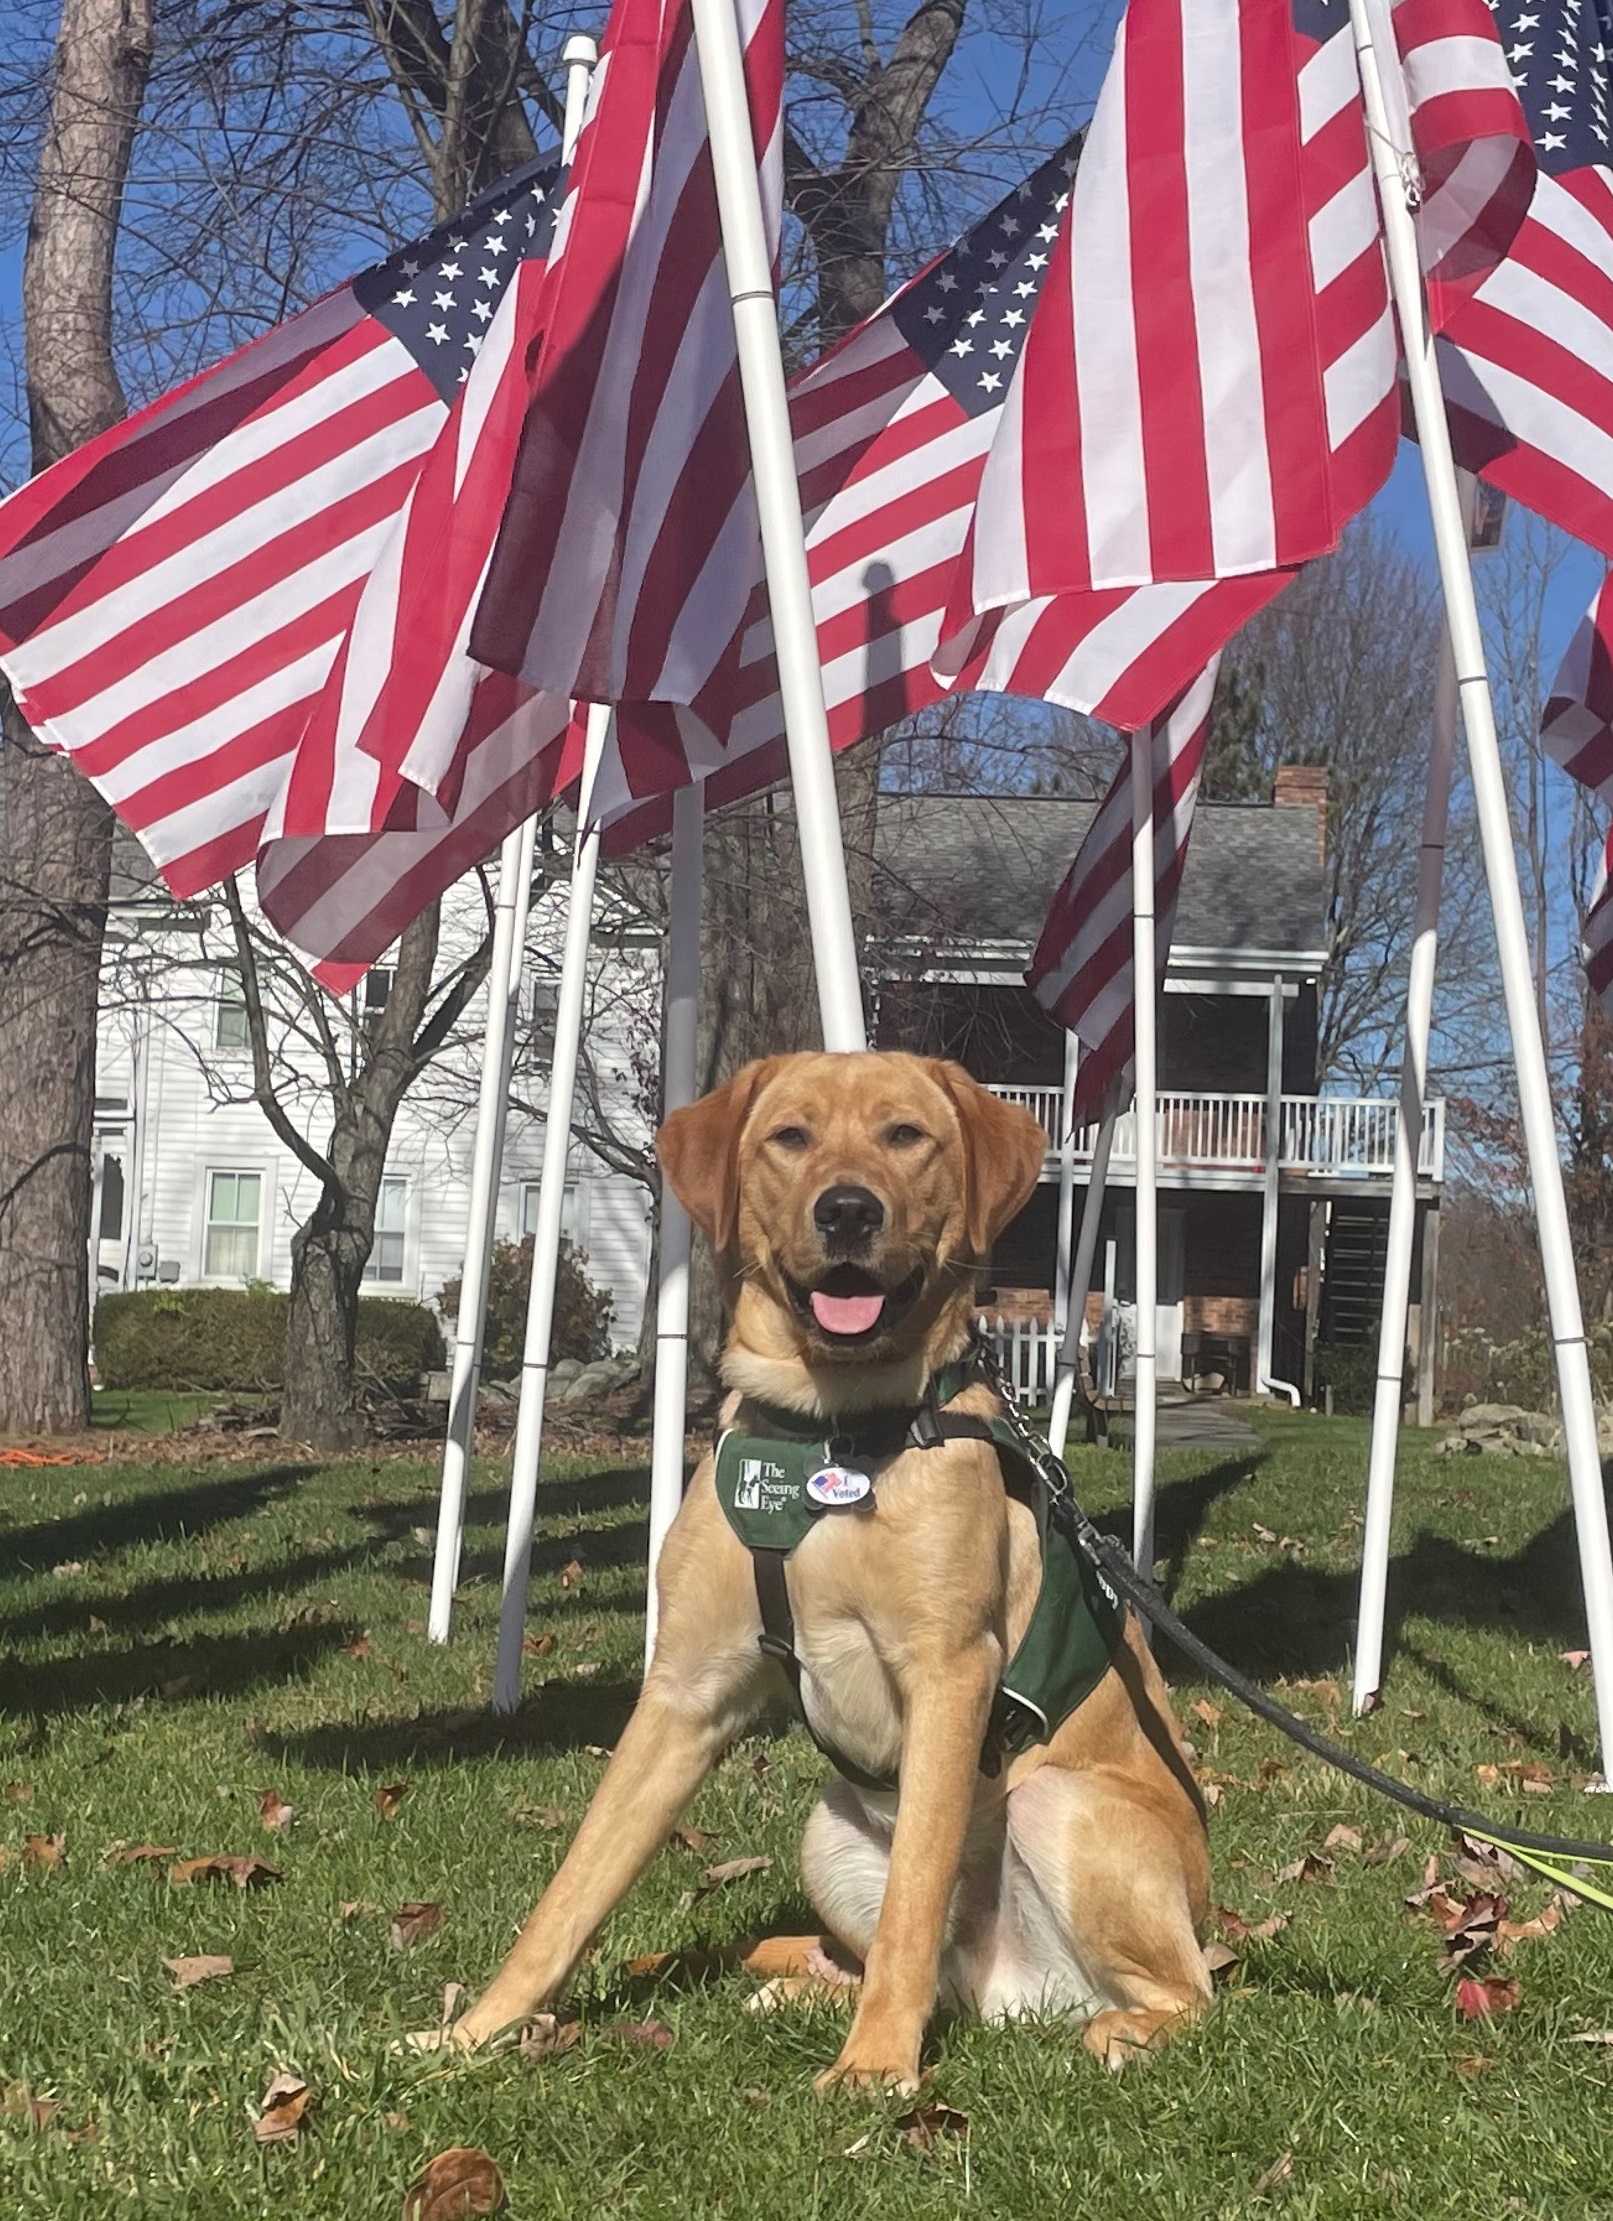 Robbie in front of an array of American flags.